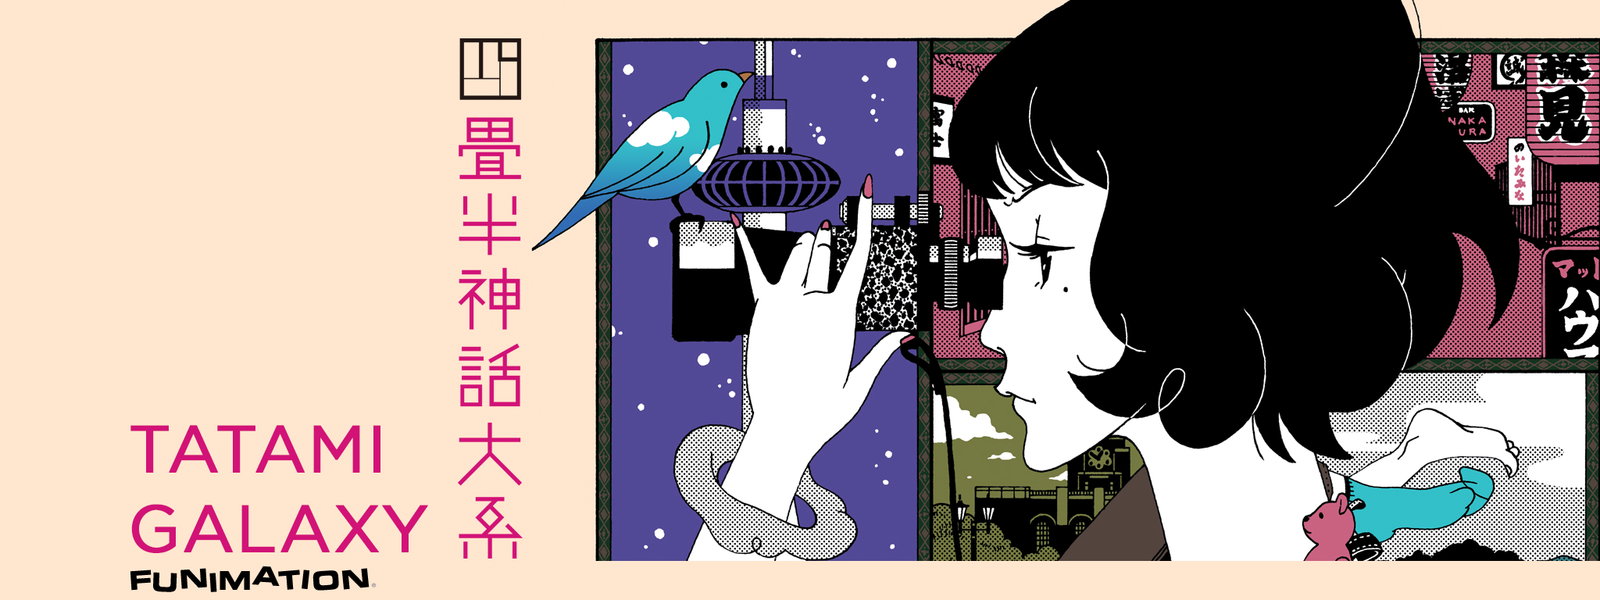 The Tatami Galaxy Backgrounds on Wallpapers Vista